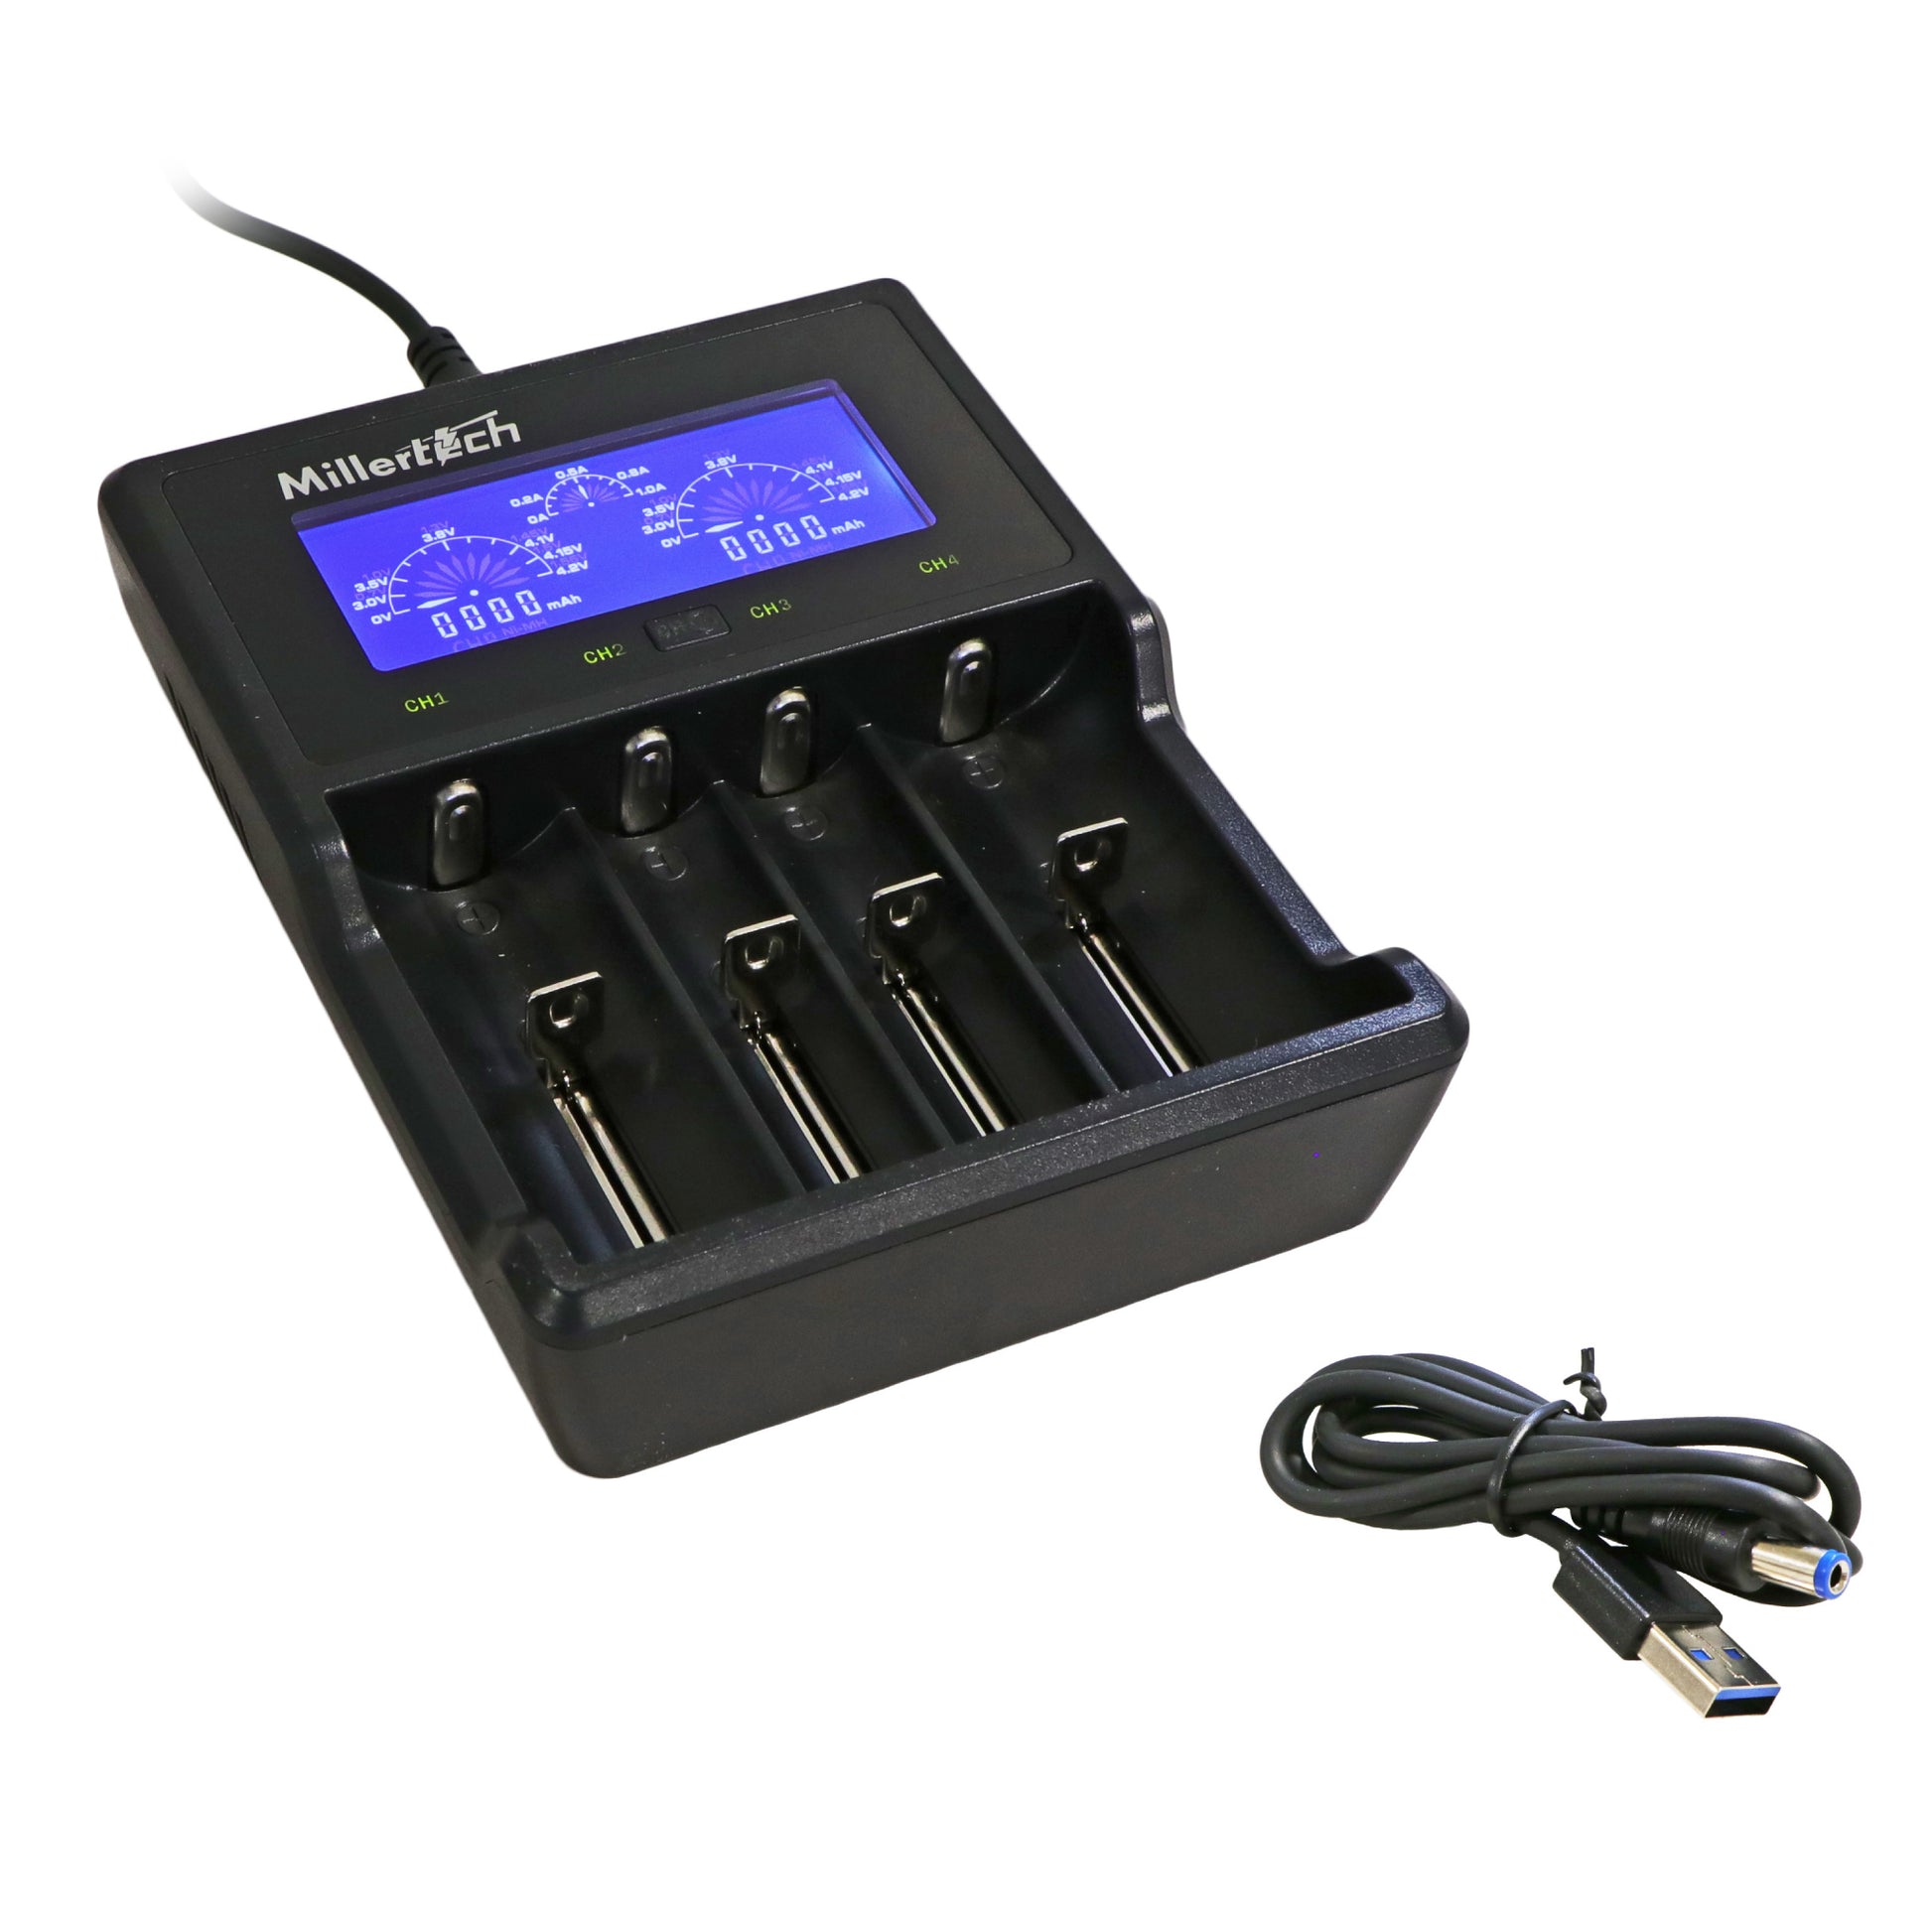 MillerTech 552-C 4 Bay Intelligent 18650 Lithium Battery Charger